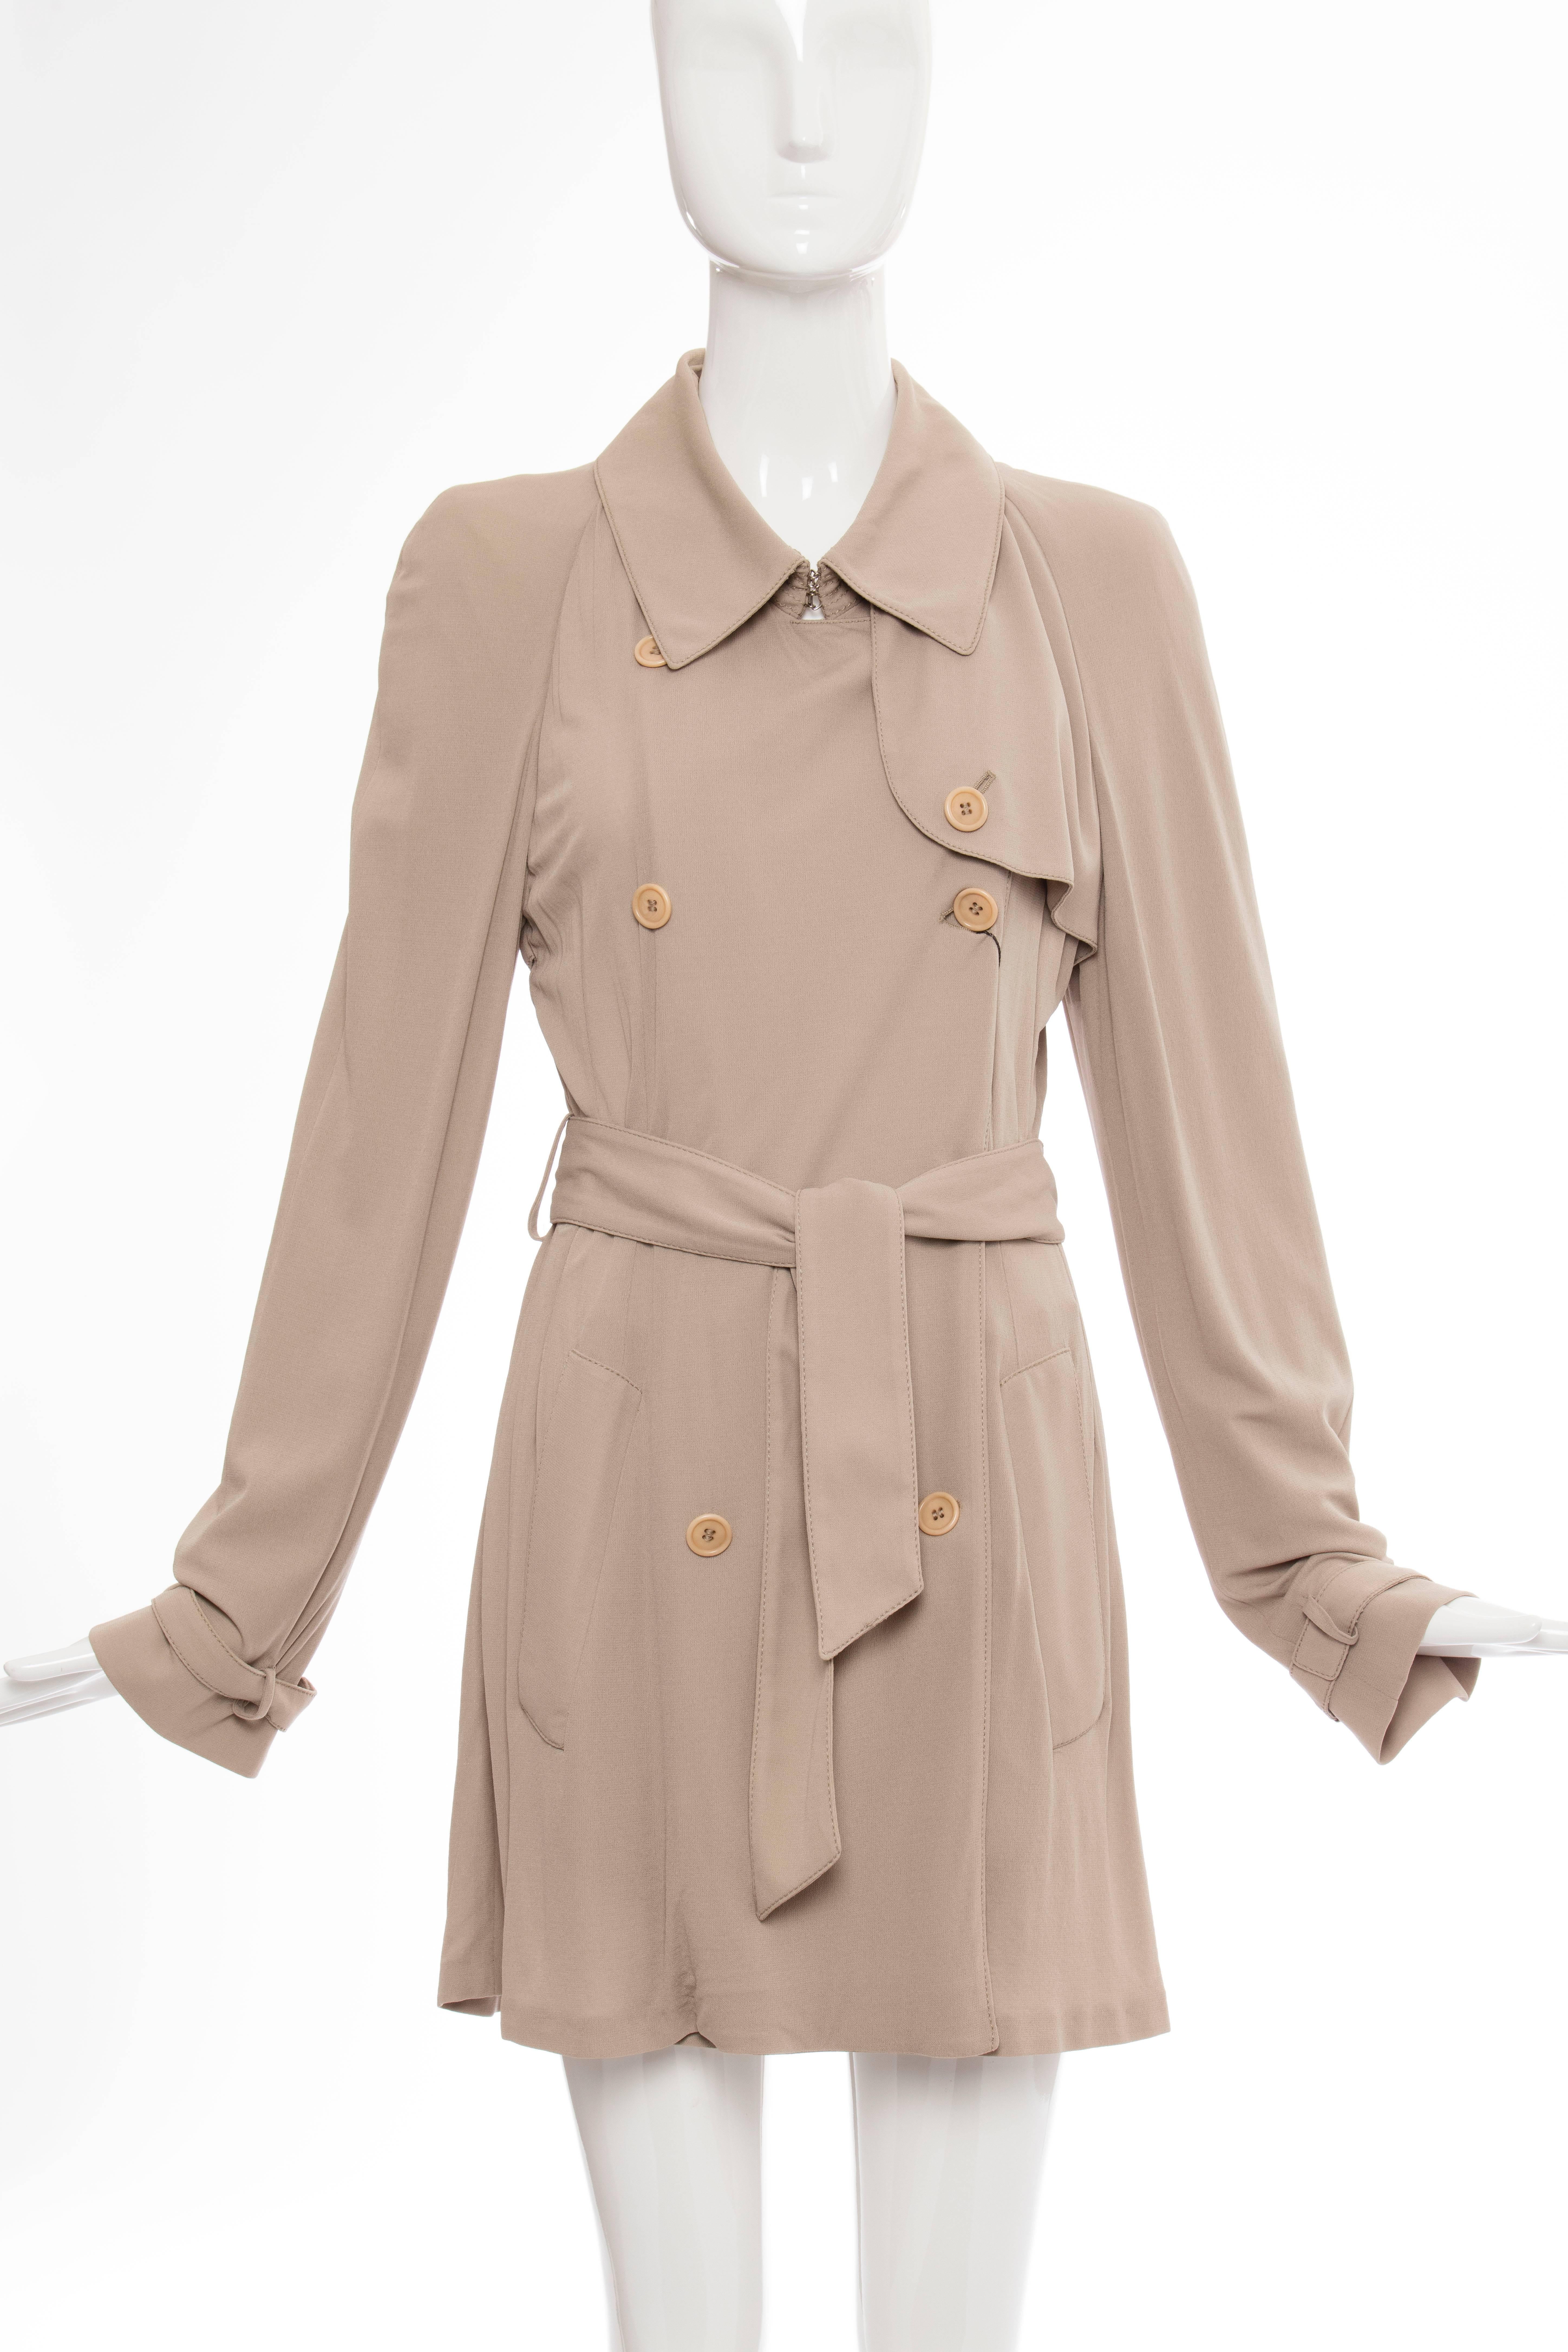 Double-breasted short light weight jacket with belted sleeves and two pockets.